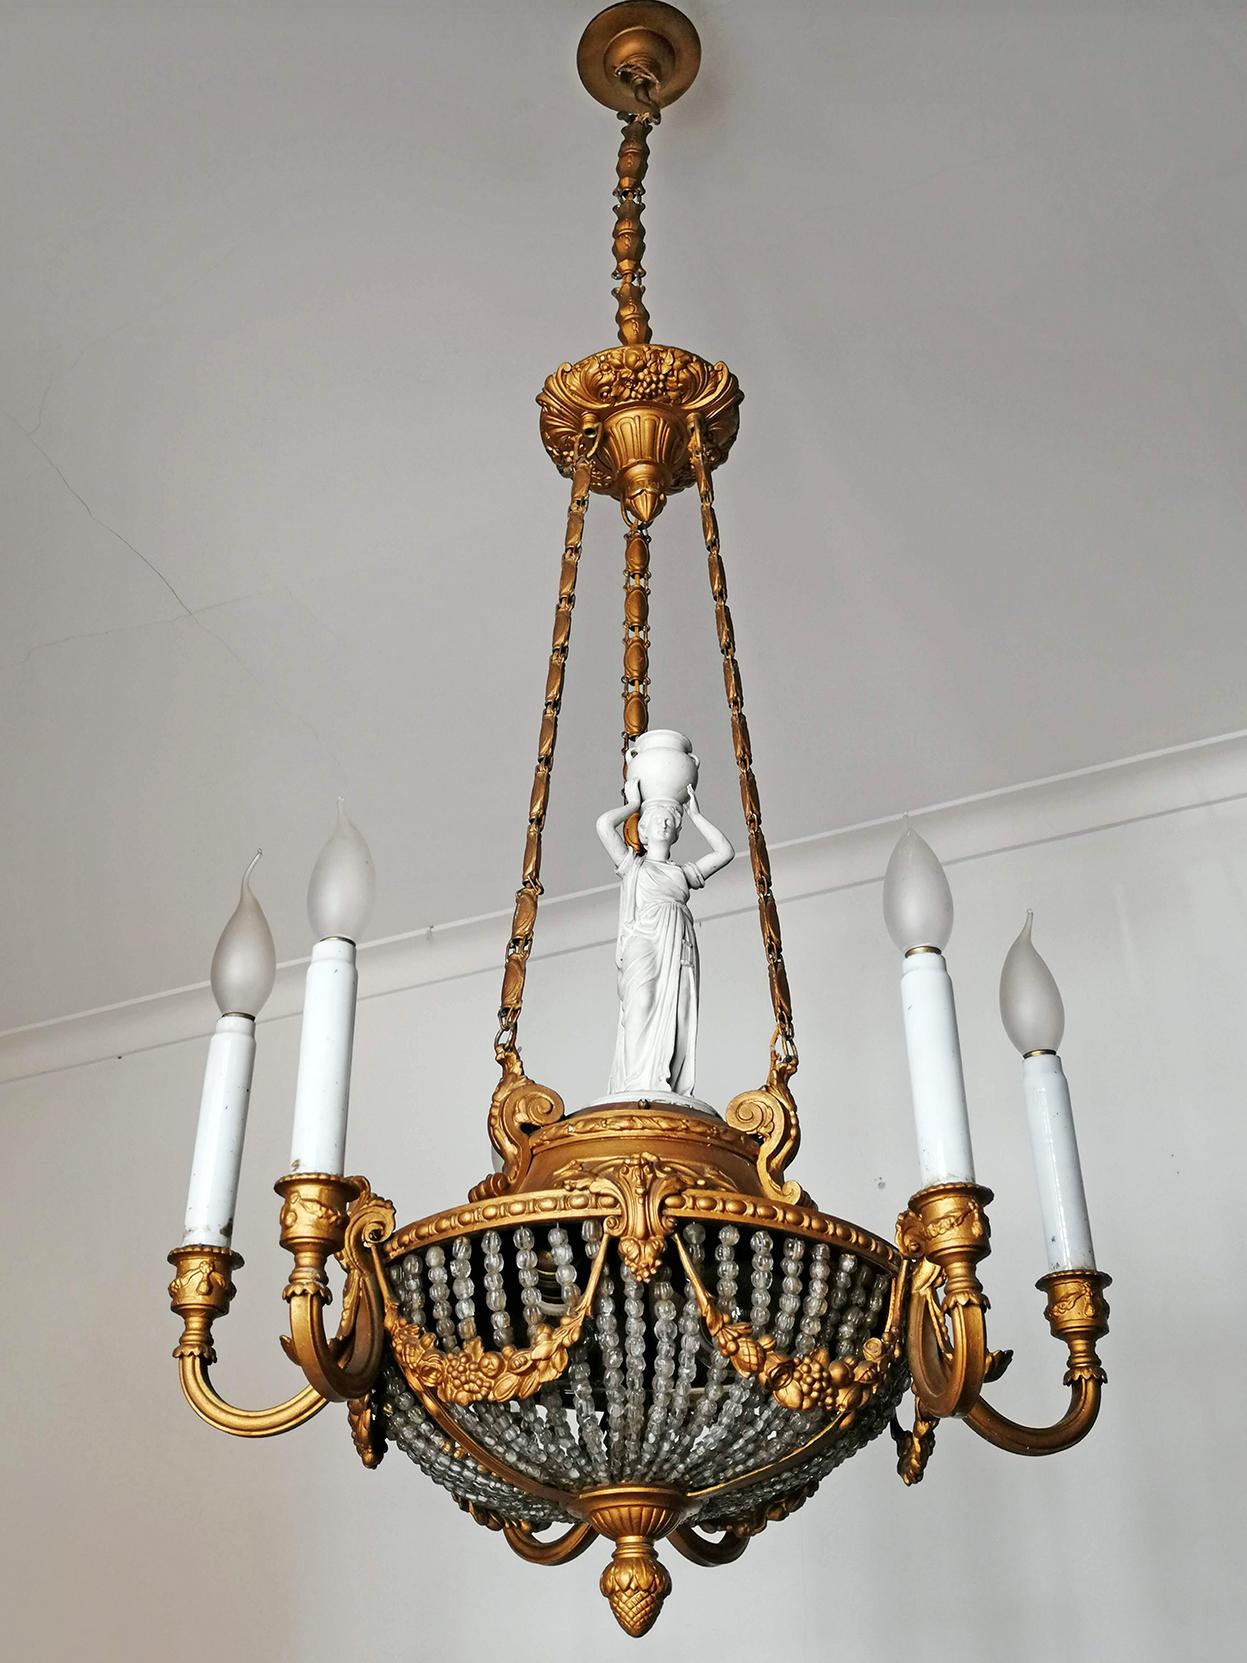 A wonderful gilt bronze and beaded-glass 8-light ceiling fixture decorated with fine ornaments and garlands, France, late 19th century. Porcelain caryatid and white glass candles.
Measures:
Diameter 21.7 in/ 55 cm
Height 53.2 in (chain 15.8 in)/